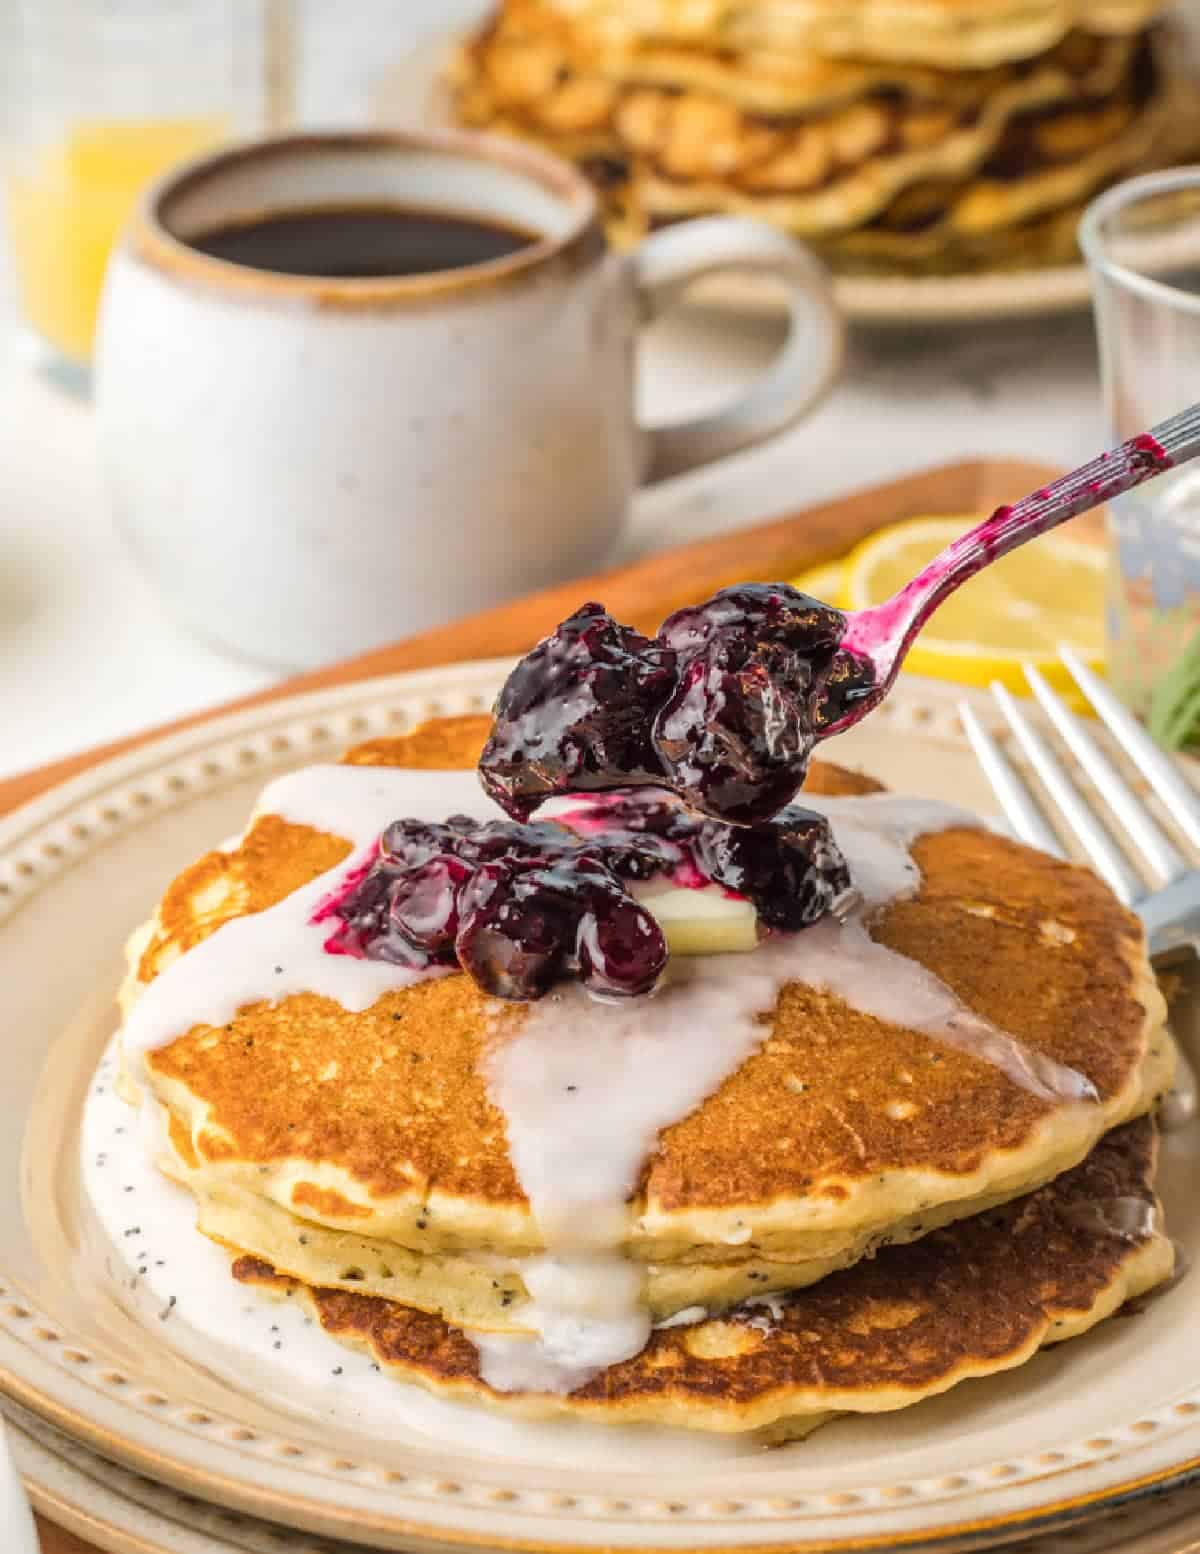 A stack of poppyseed pancakes with blueberry compote on top.